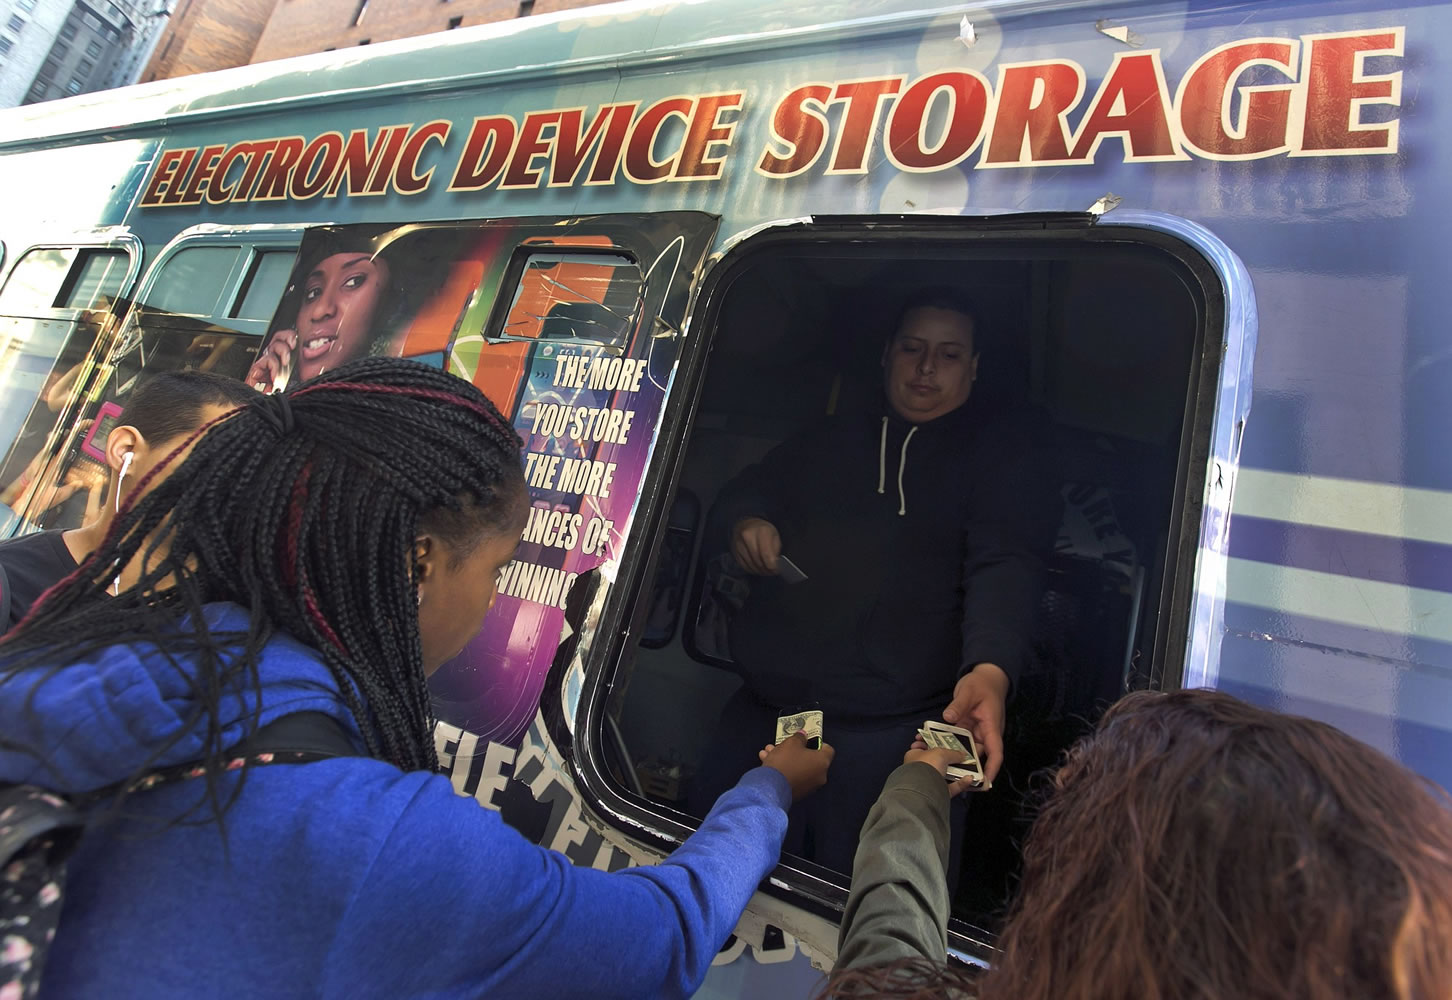 Students from the adjacent Norman Thomas High School building, pay a dollar to driver Rommel Perez to check their electronic devices at a van, before school Thursday.